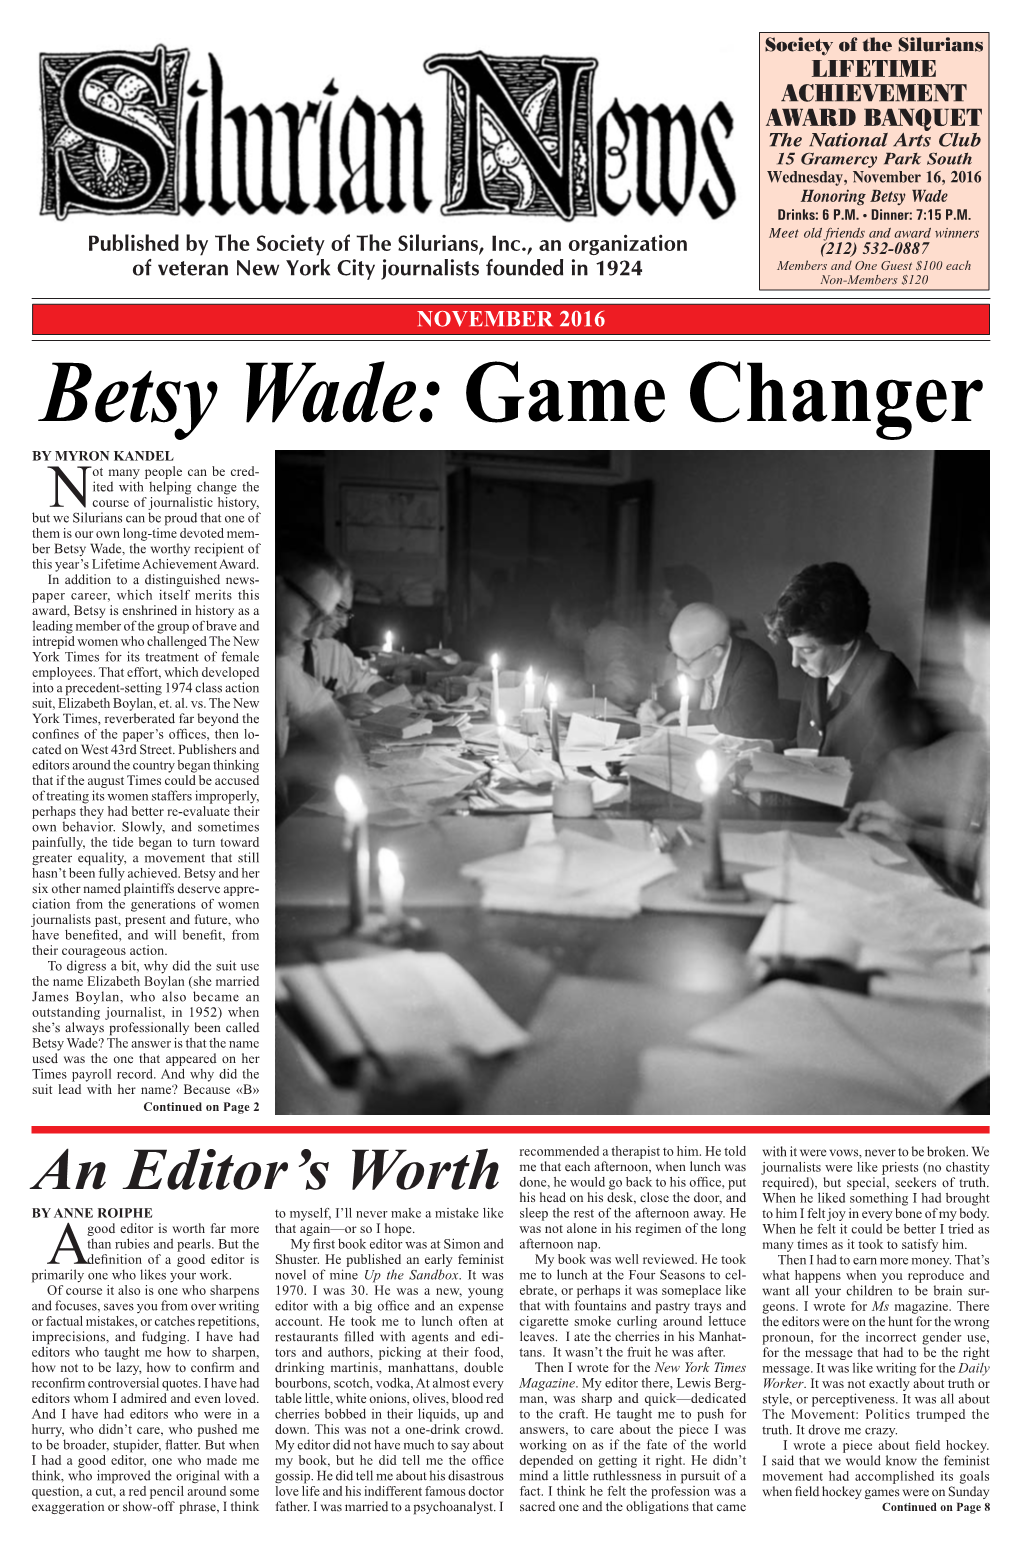 Betsy Wade Drinks: 6 P.M